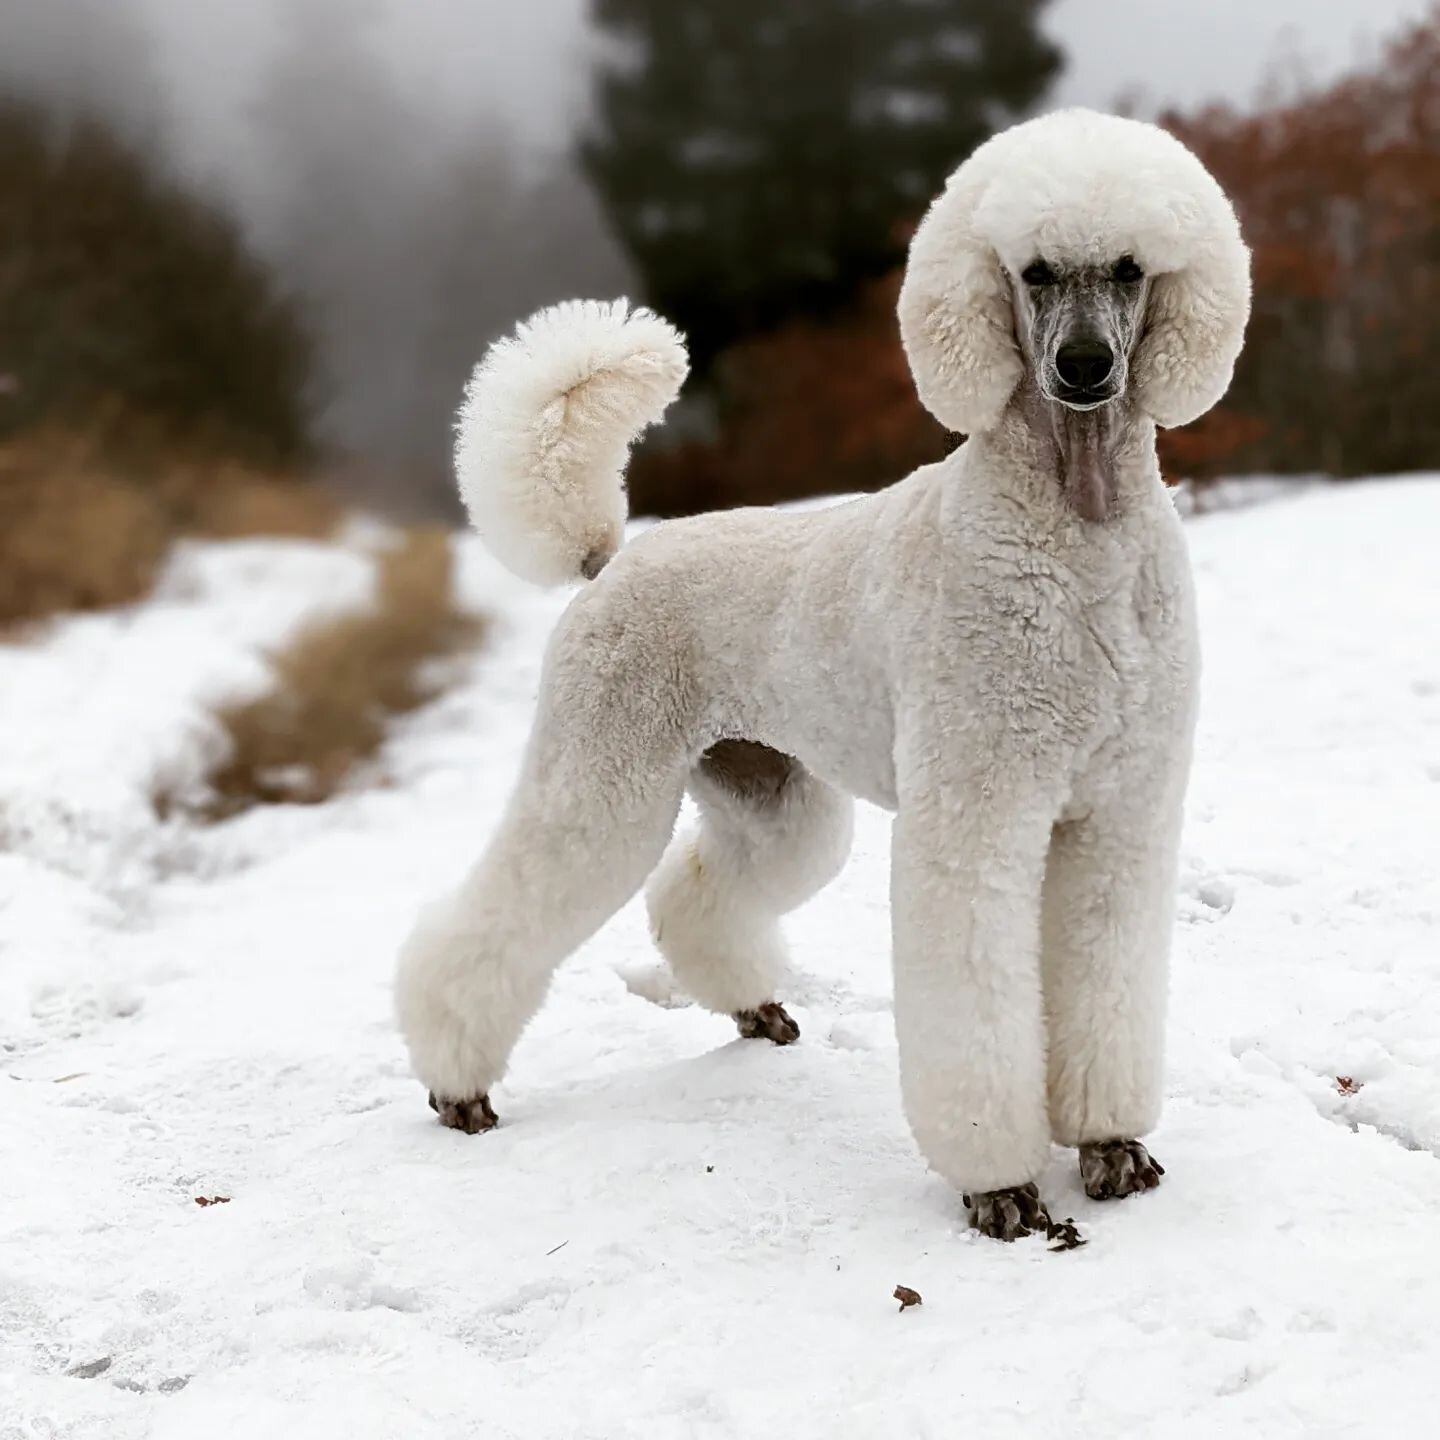 Amber is feeling fresh with that new do and mountain breeze 👑
#poodlesofinstagram #dogsofcolorado #livelifeoffleash #denver